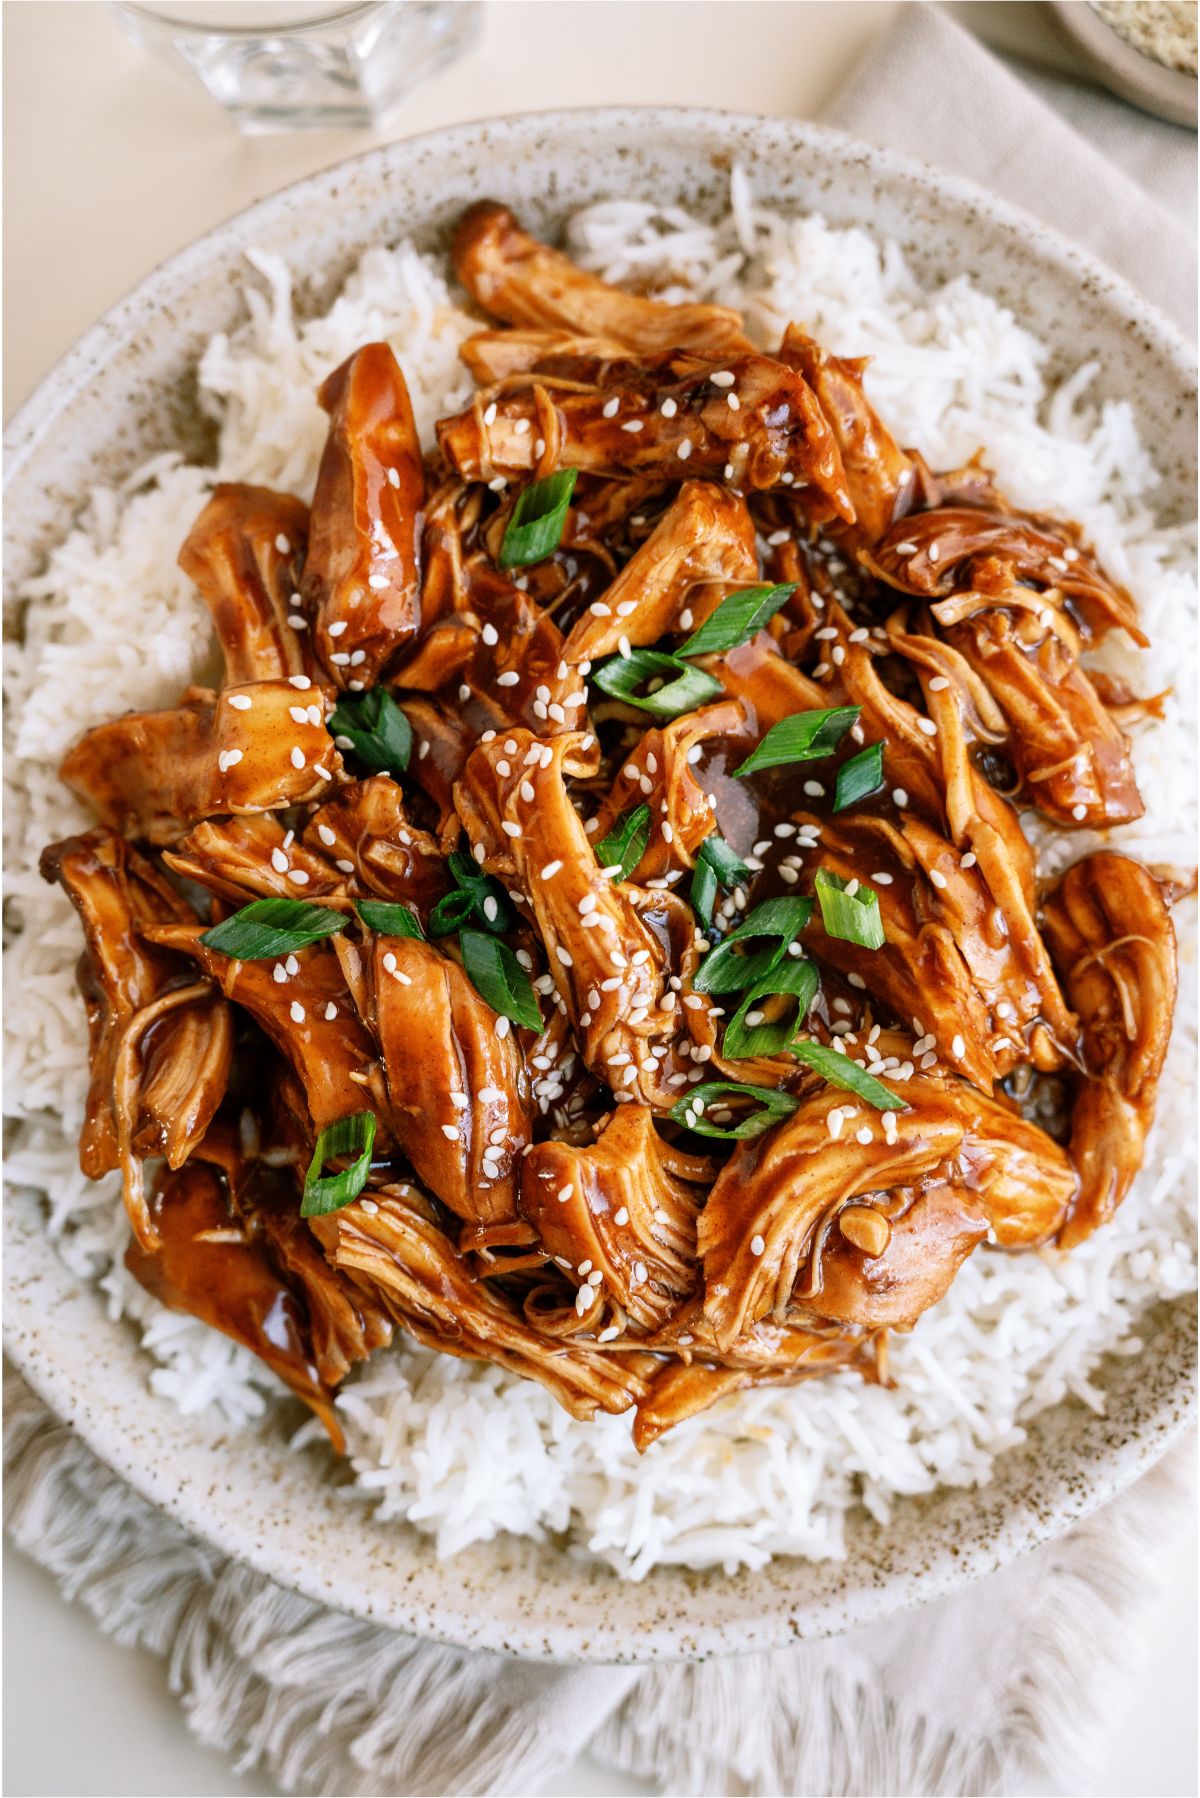 Top view of shredded Slow Cooker Asian Glazed Chicken on top of rice